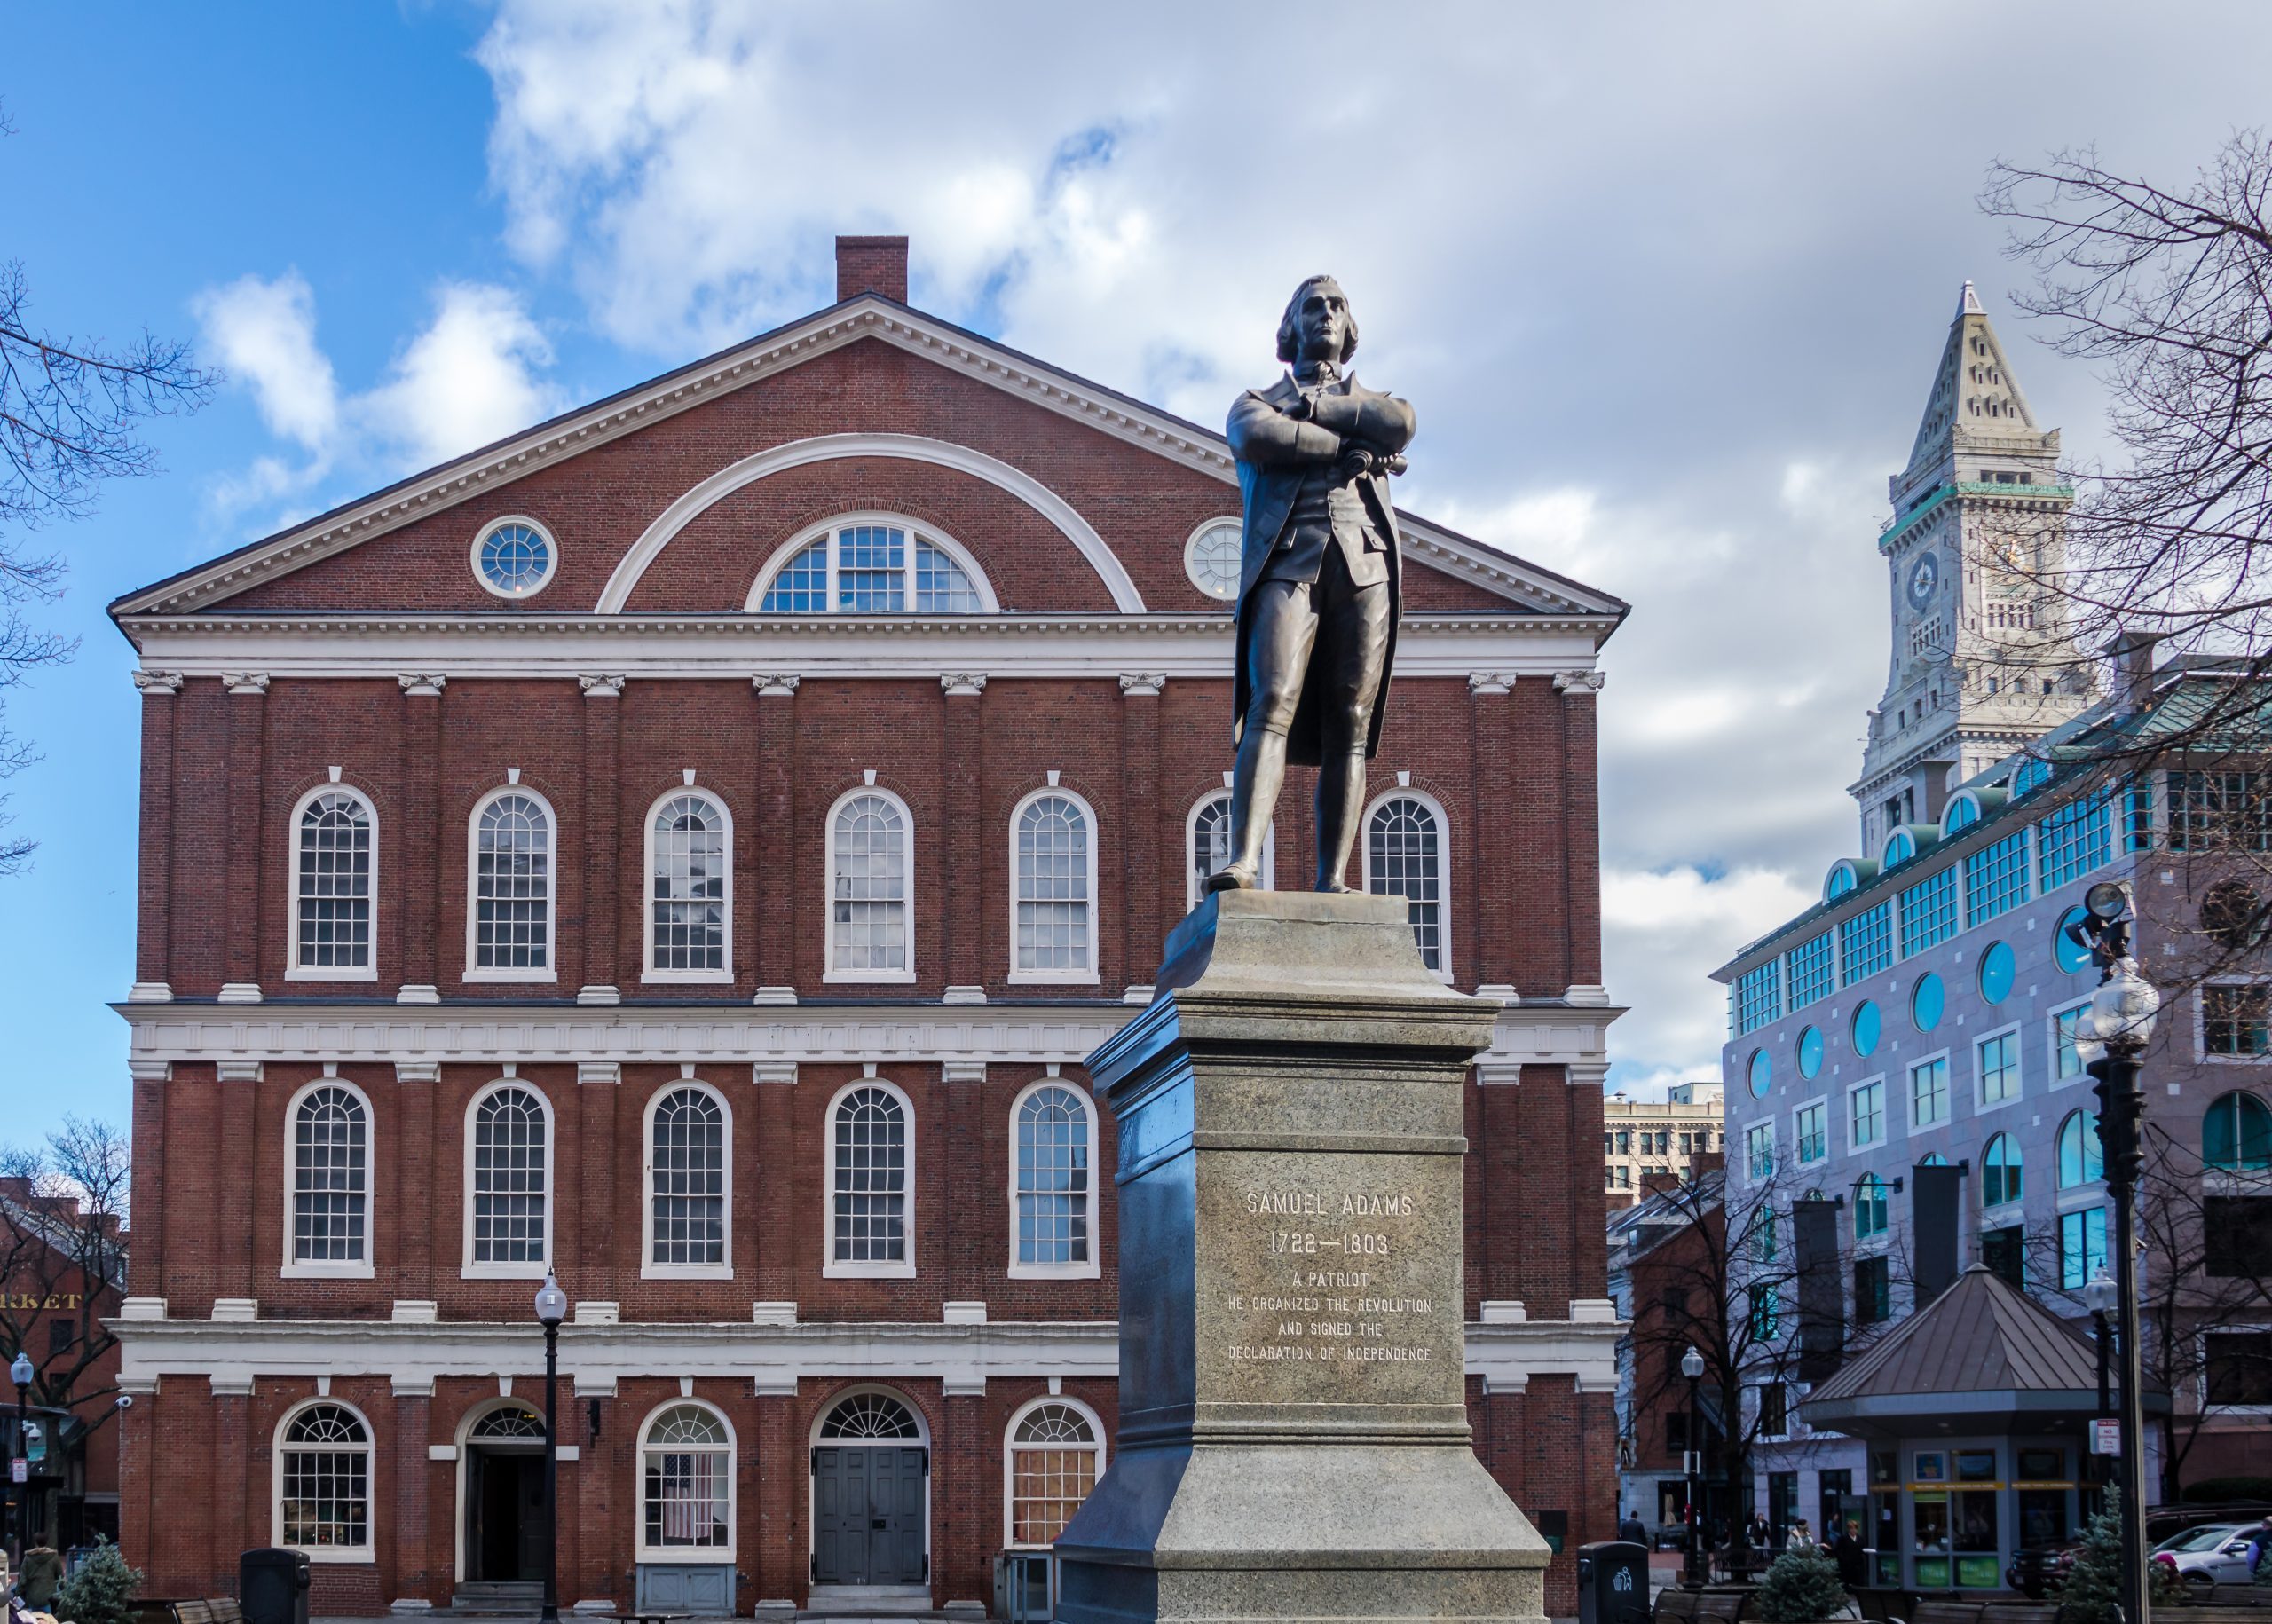 What are some tips for enjoying the Boston Freedom Trail?